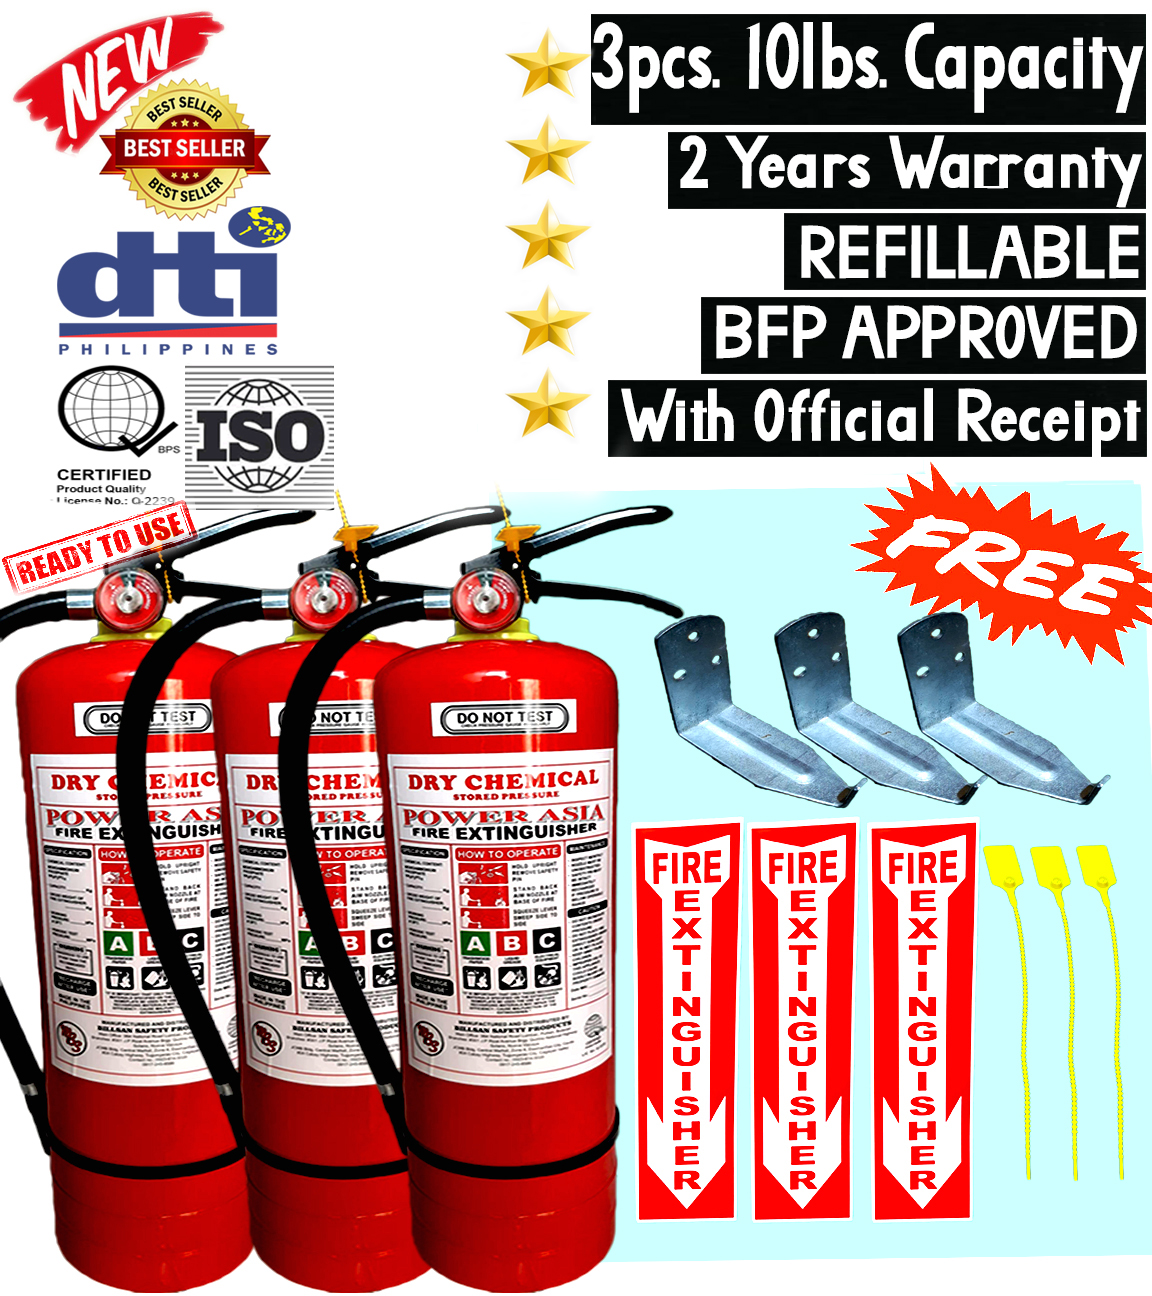 Fire Extinguisher 3pcs 10lbs Abc Dry Chemical Power Asia Brand Lazada Ph 9668